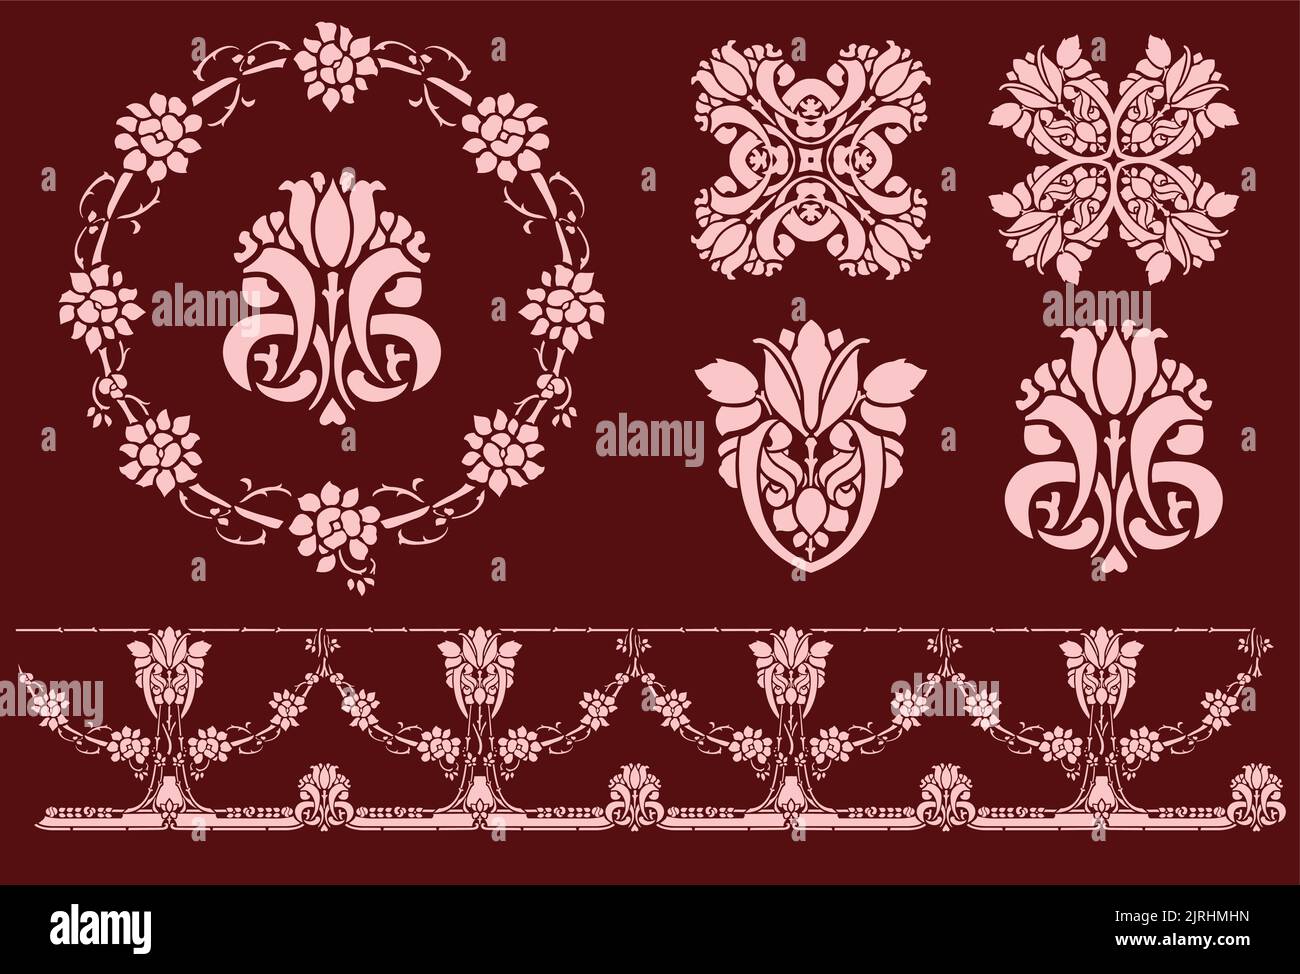 A set of vintage vector decorative rose stencil icons and borders. Stock Vector